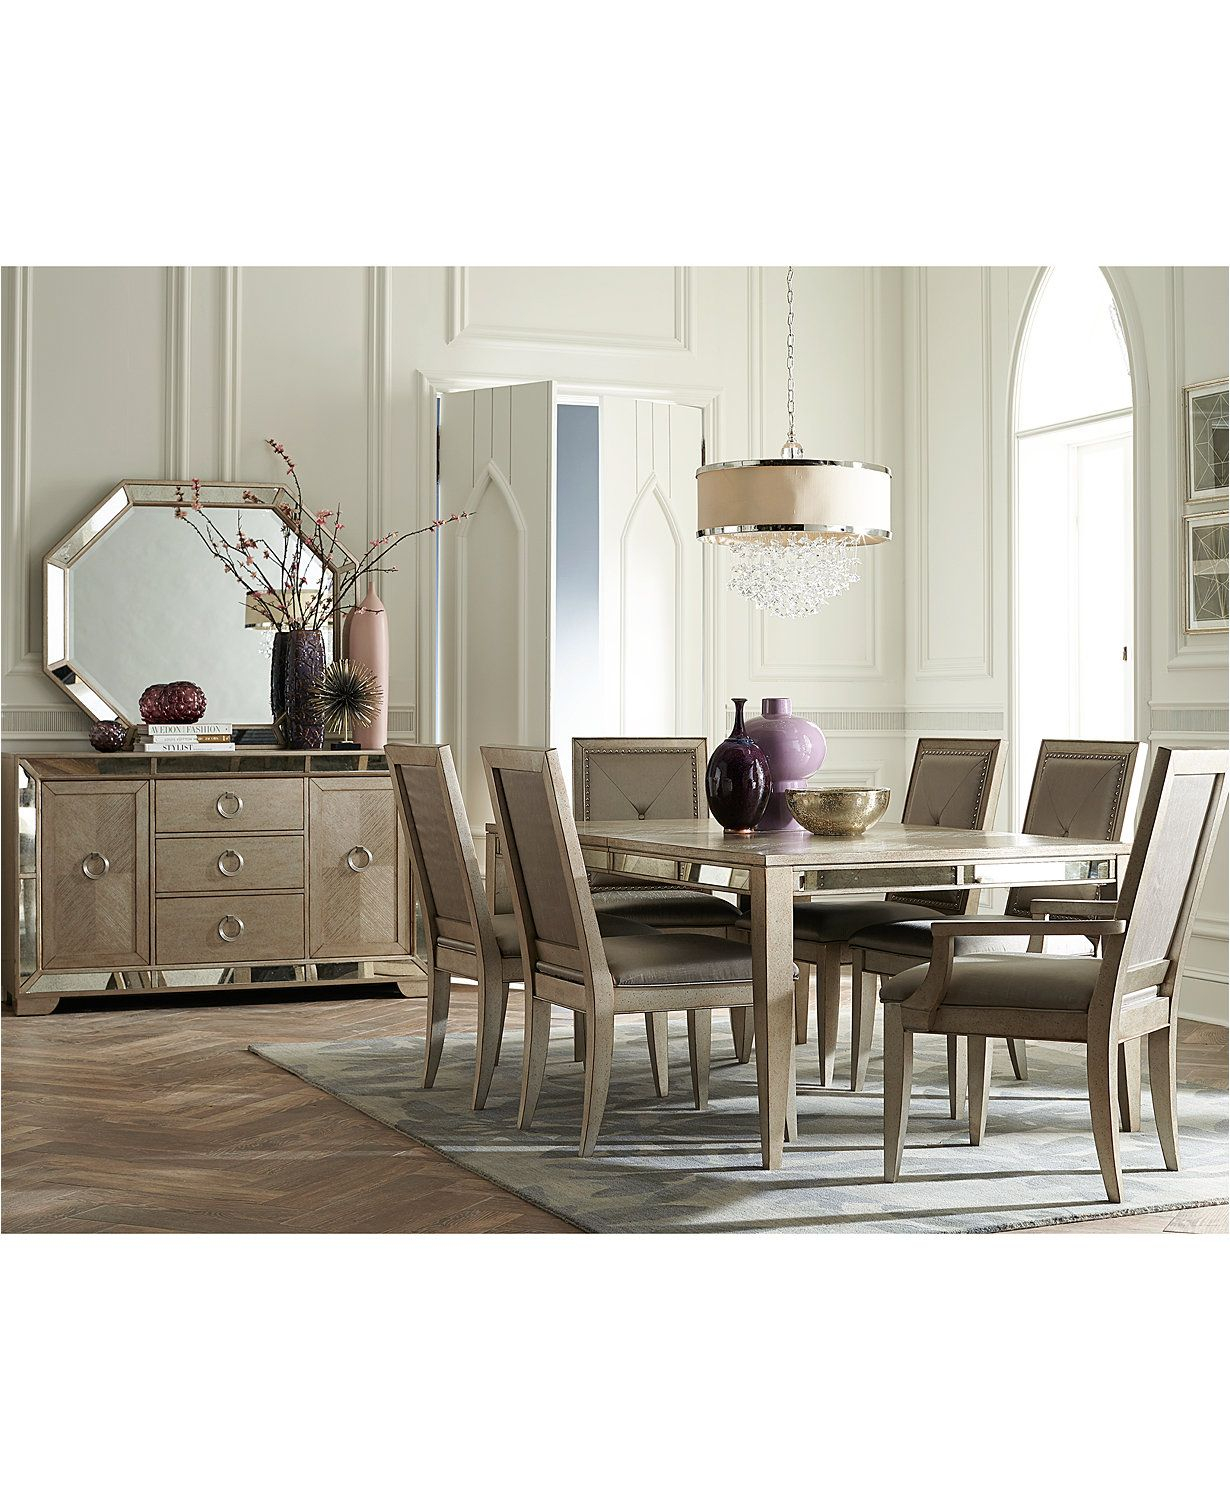 Ailey Dining Room Furniture Collection Only At Macys inside measurements 1230 X 1500